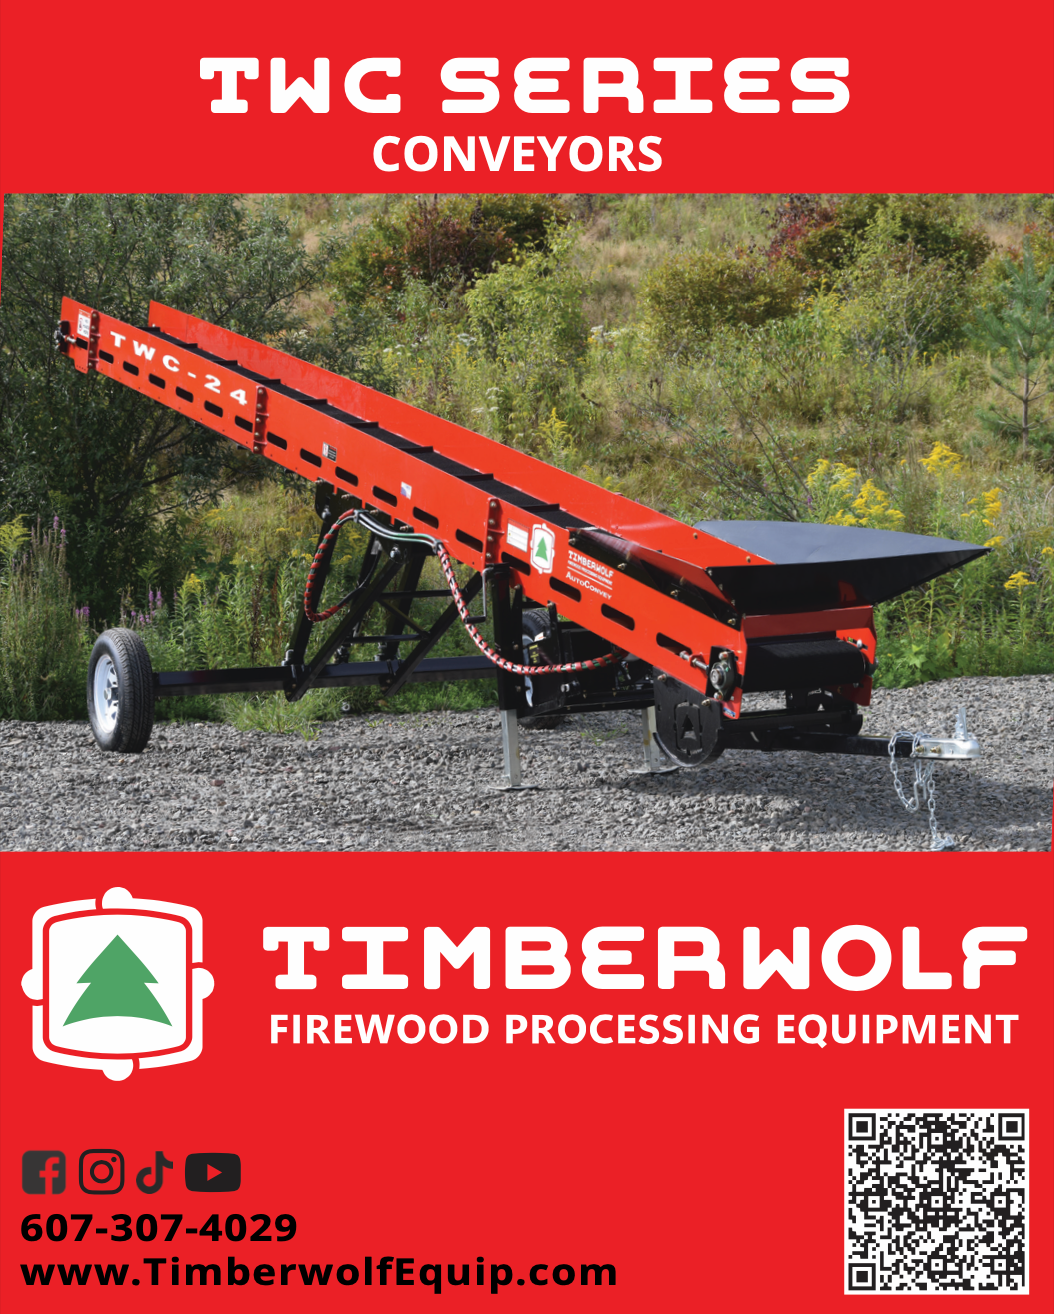 Timberwolf Firewood Processing Equipment TWC Series Conveyors Technical Specifications Brochure Download 